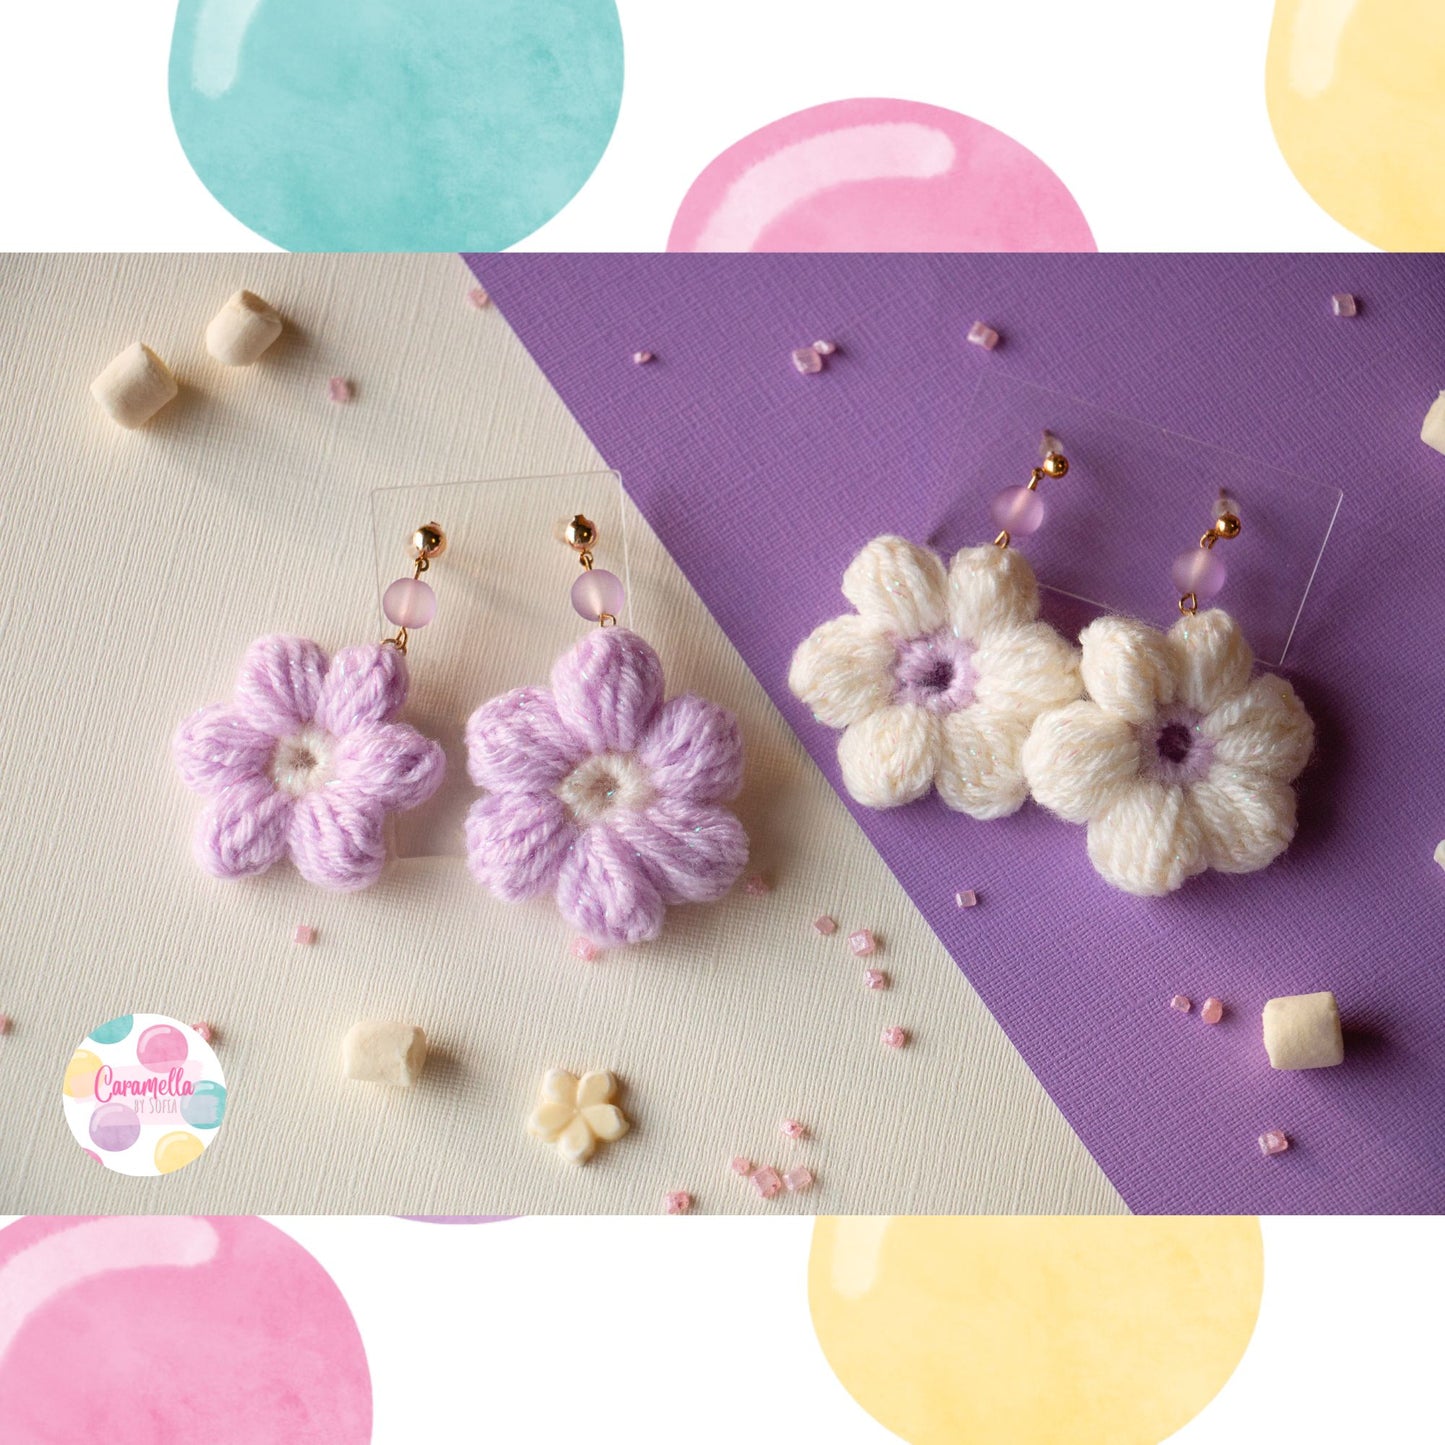 Handmade Crochet Puff Flower Earrings - Gold Plated - Lilac and Pale Yellow  - Purple Beads